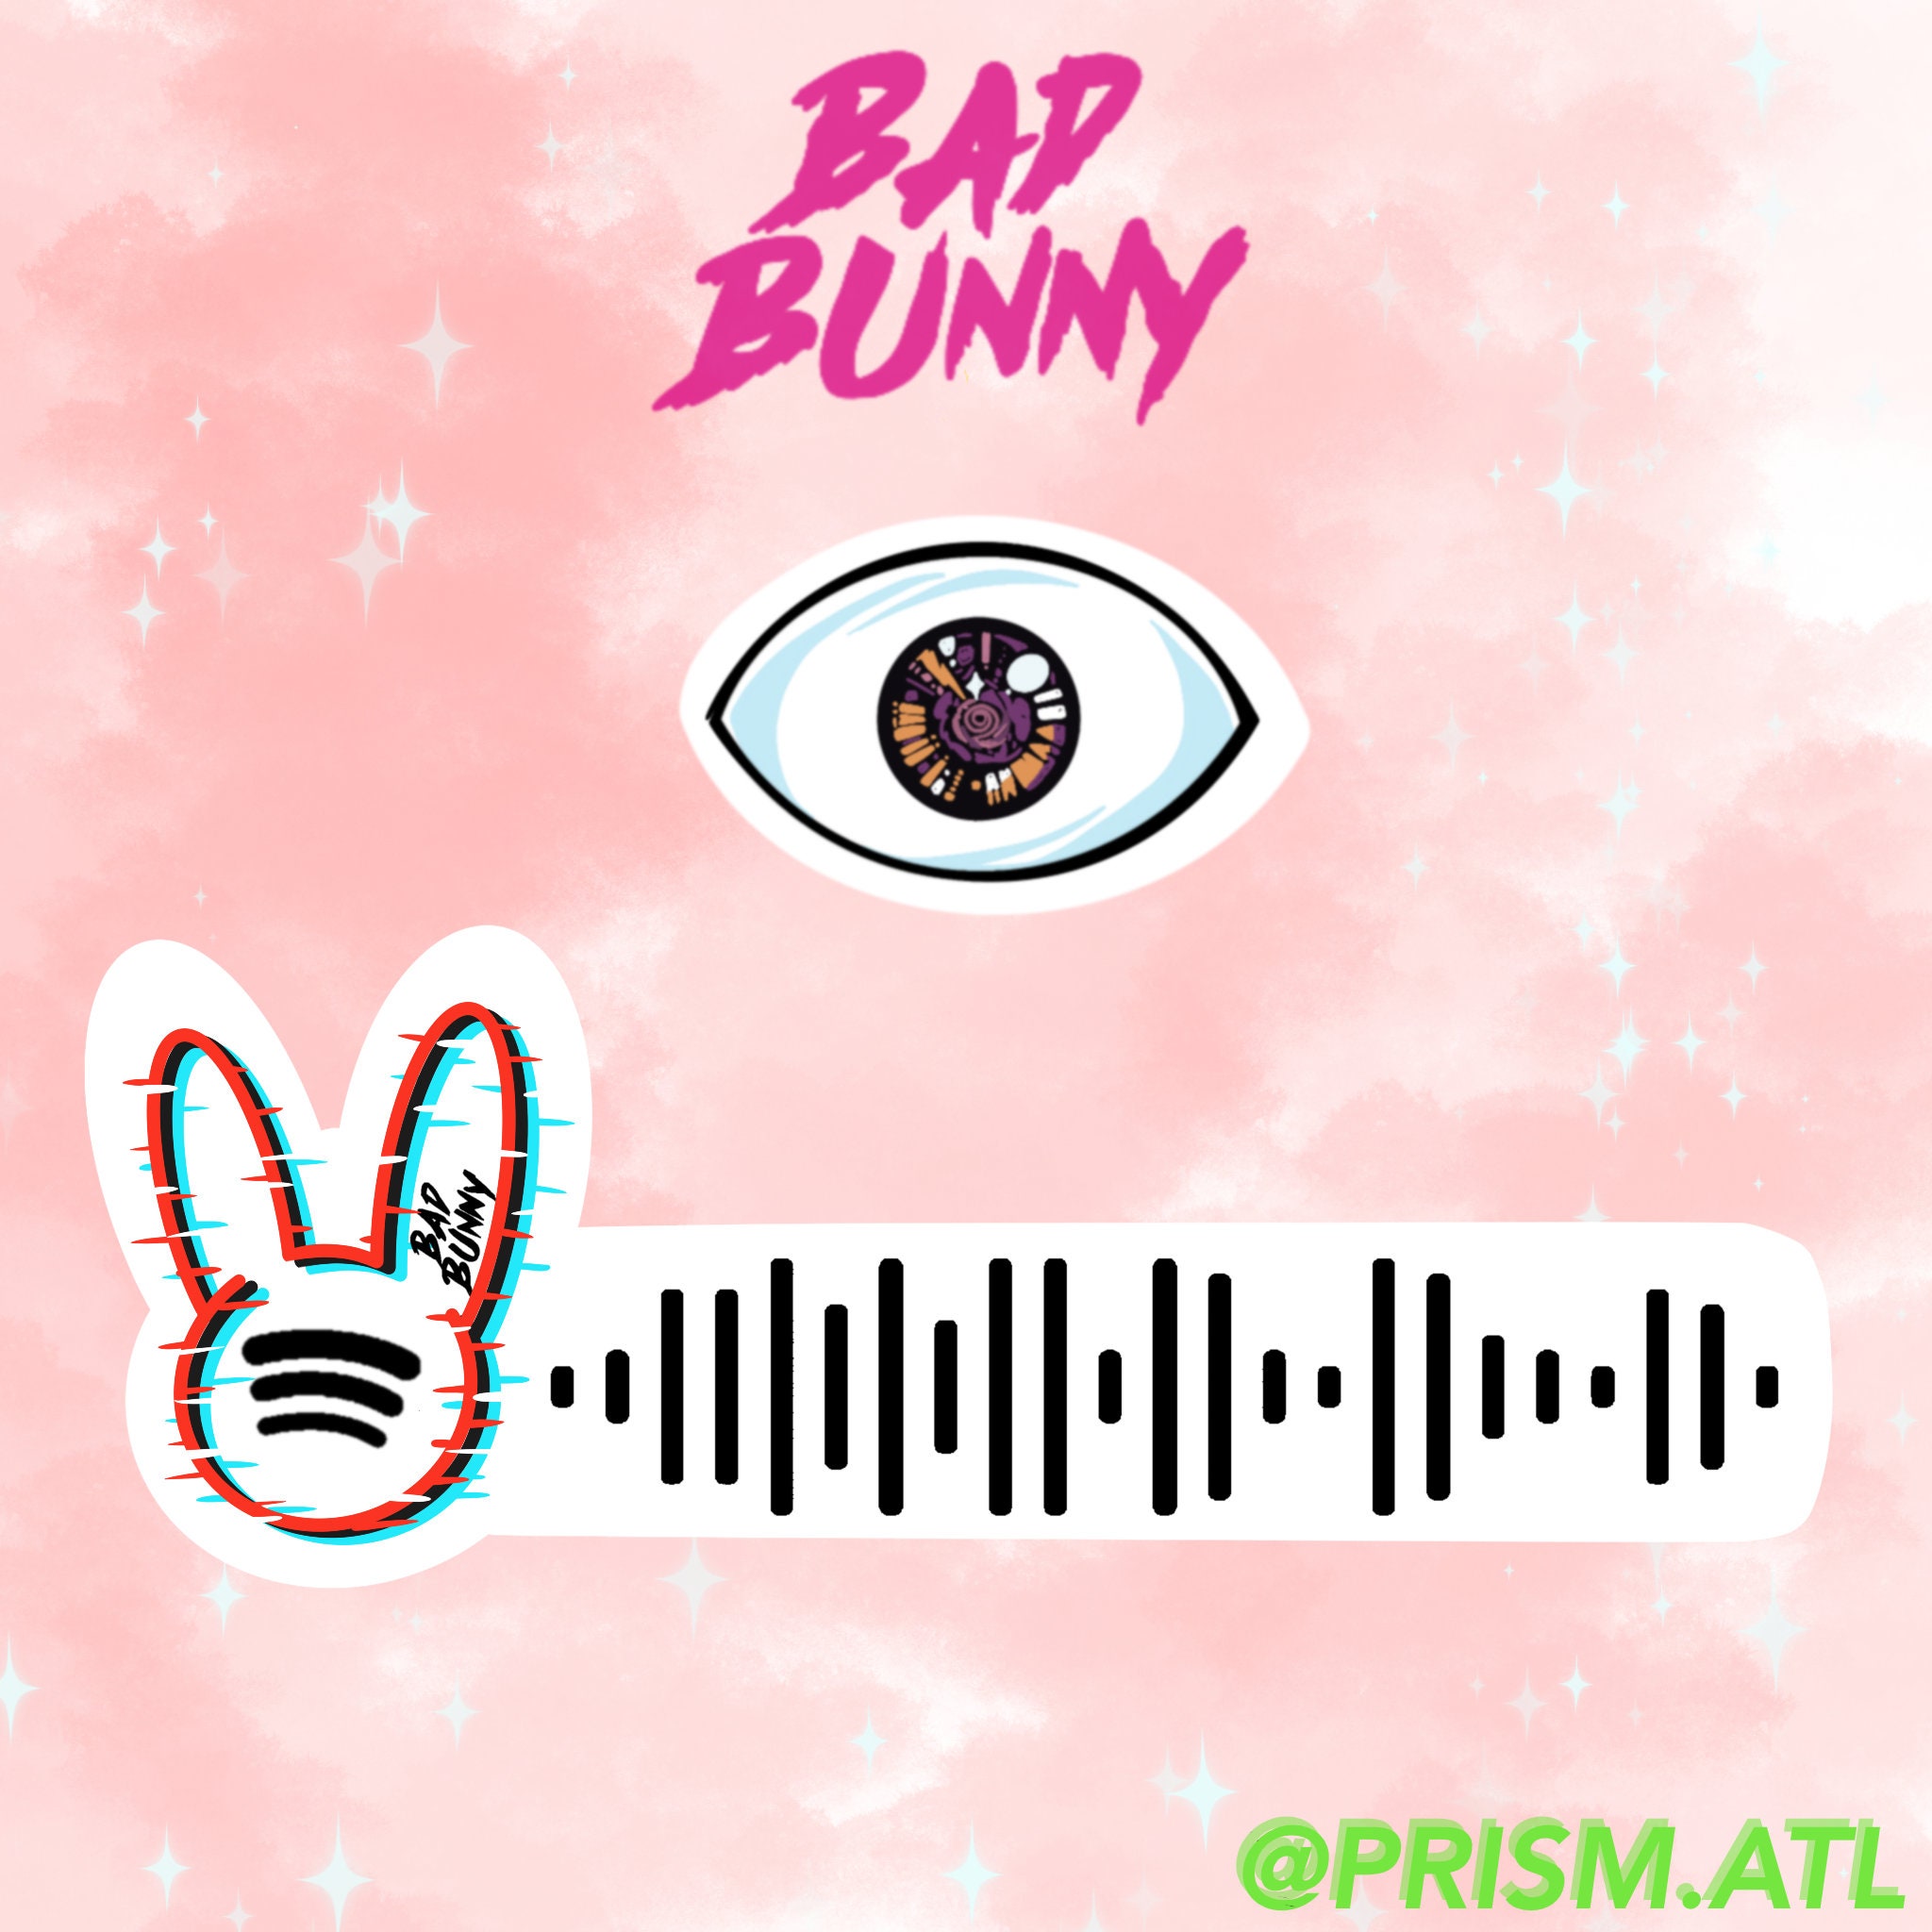 X100pre Bad Bunny Eye And Spotify Song Sticker Etsy